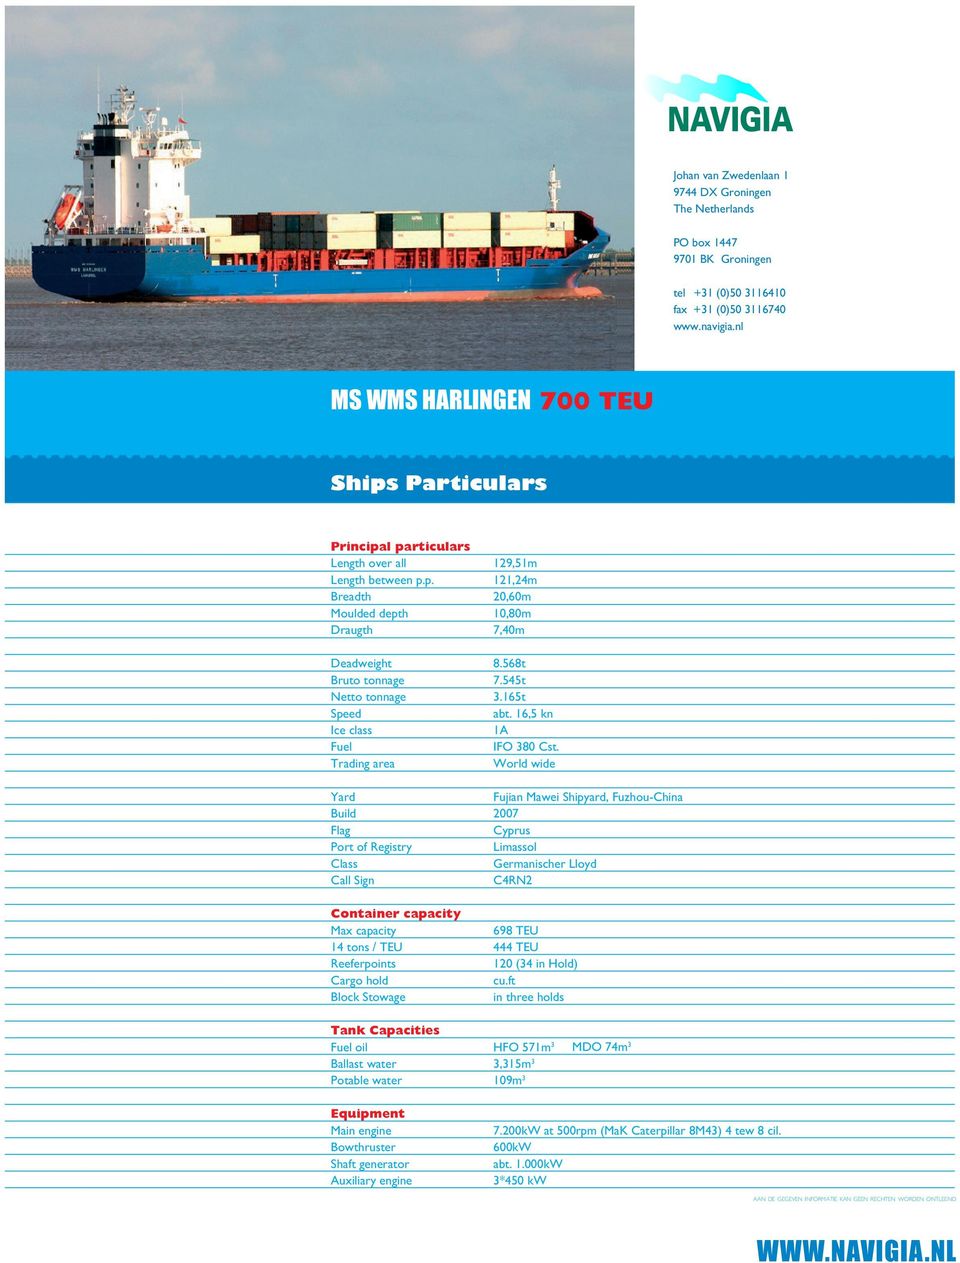 568t Bruto tonnage 7.545t Netto tonnage 3.165t Speed abt. 16,5 kn Ice class 1A Fuel IFO 380 Cst.